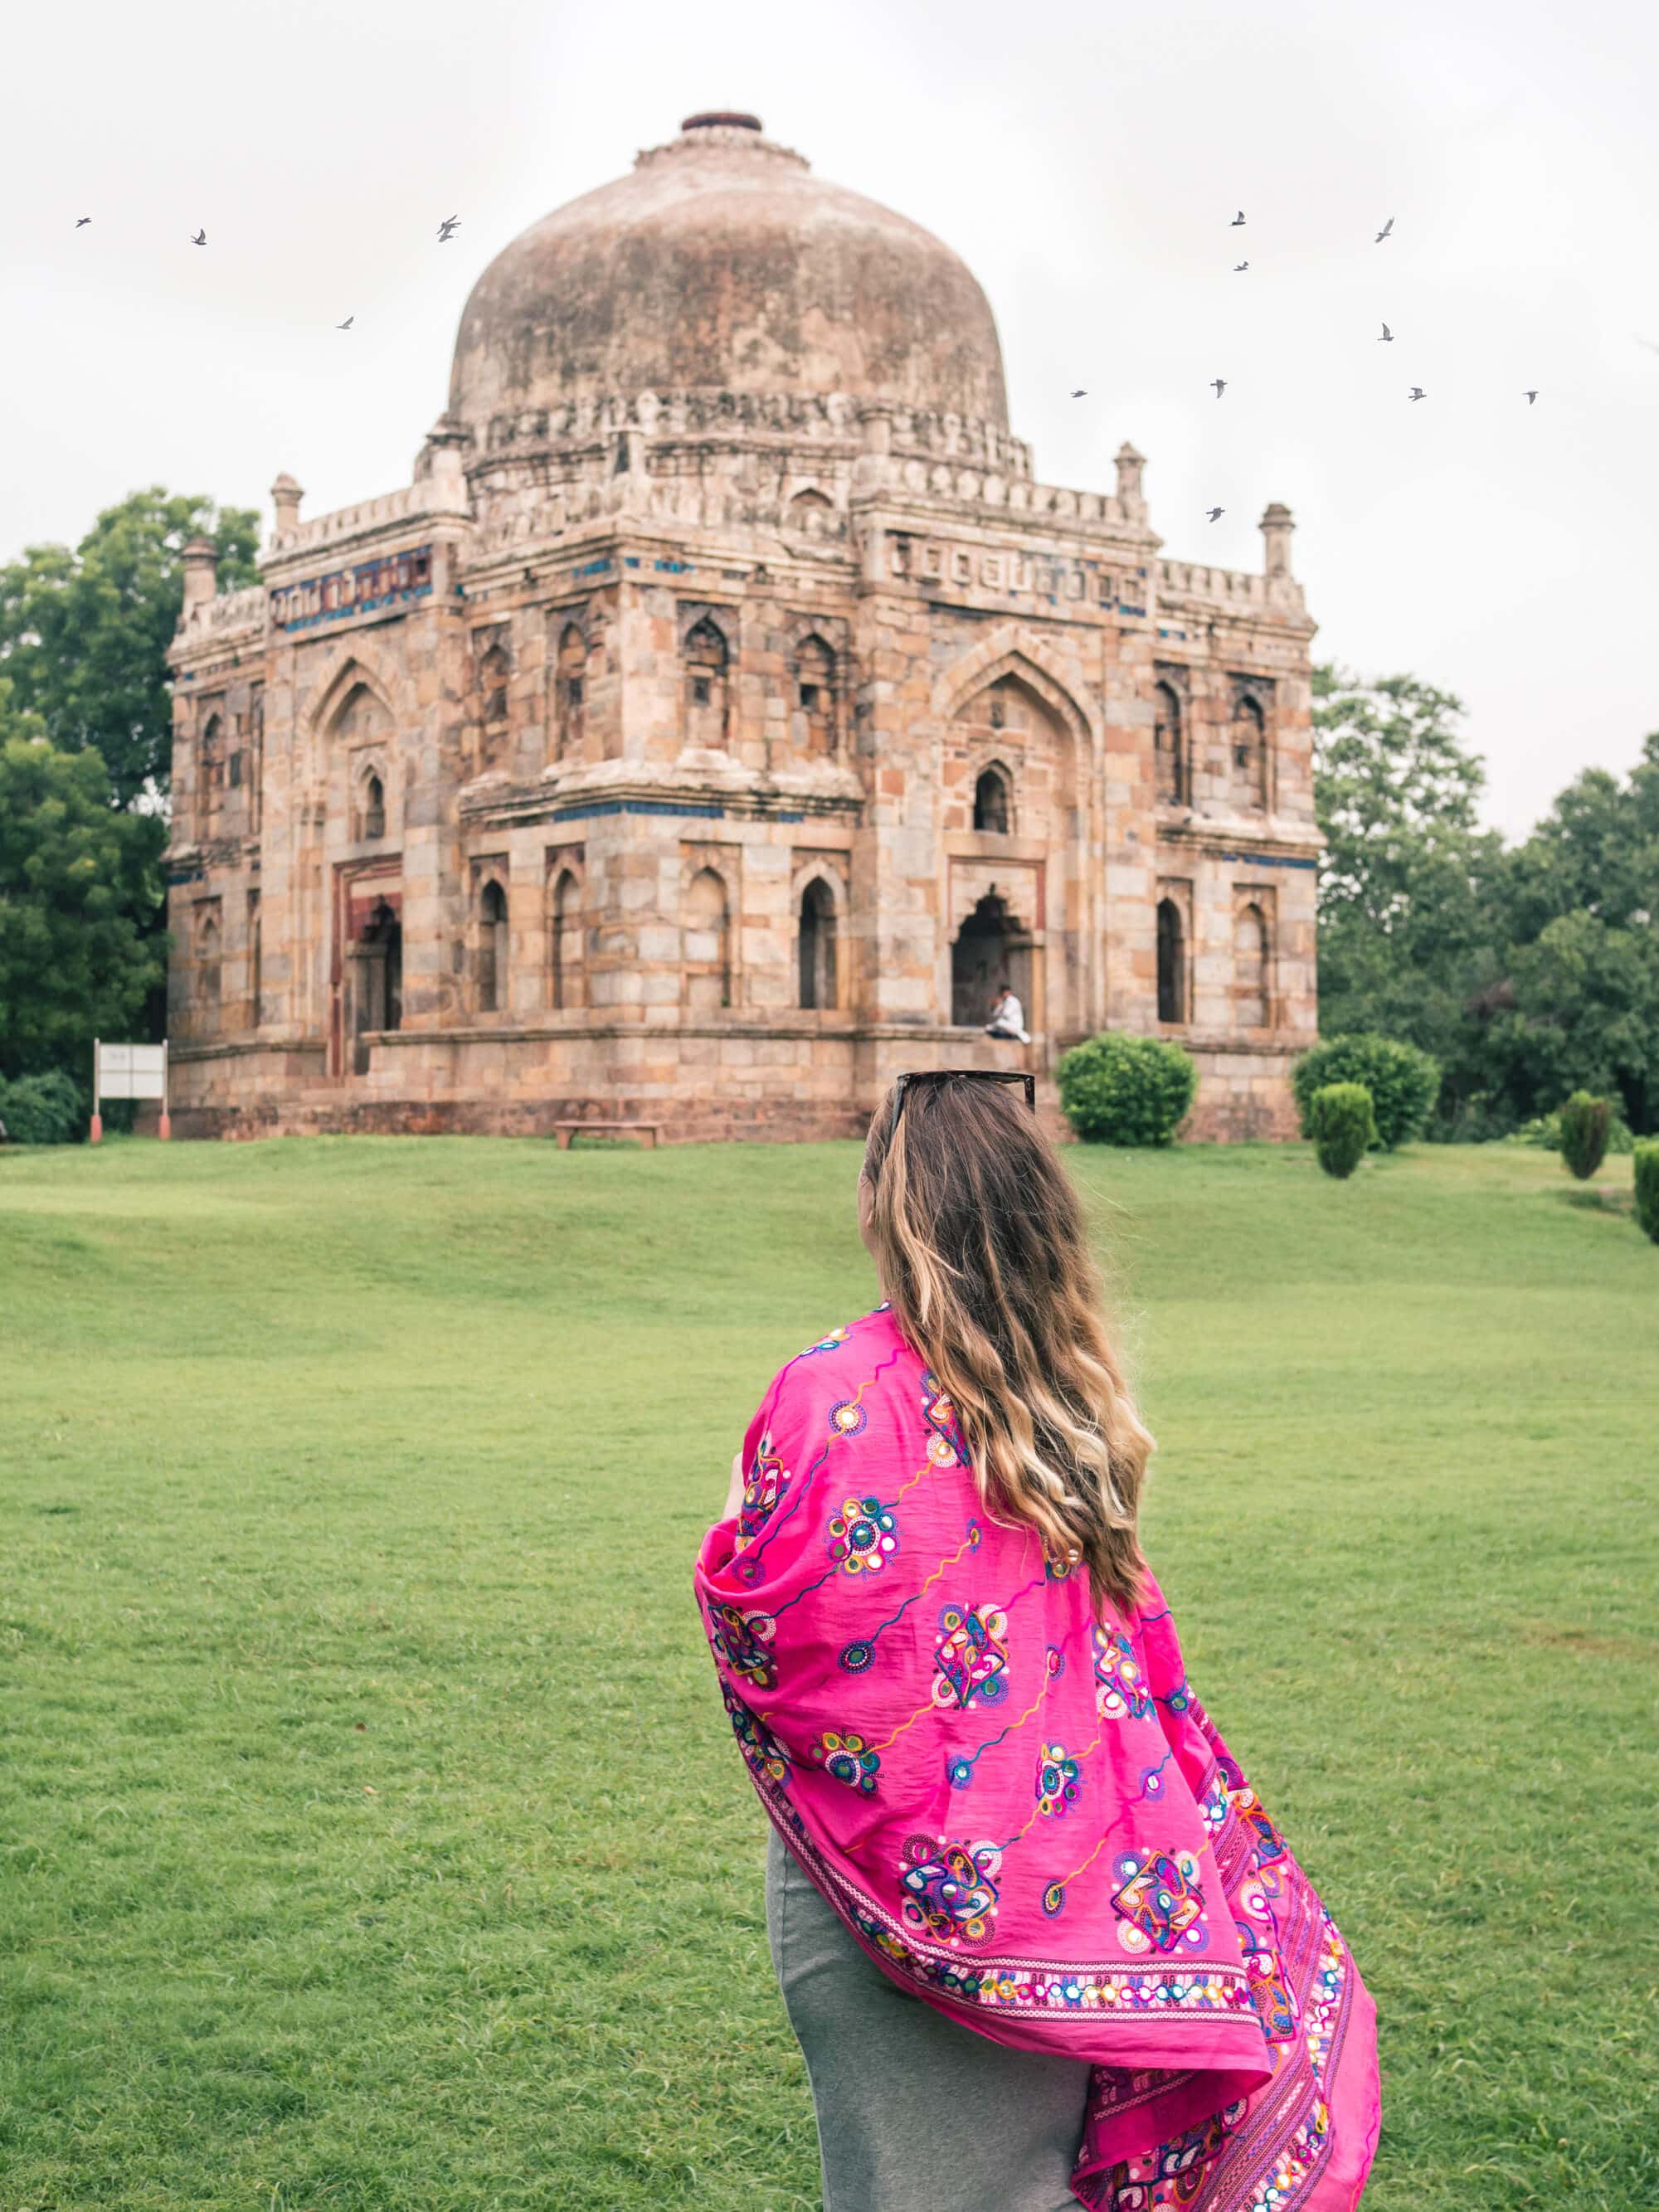 The ultimate 2 day New Delhi Itinerary - The stunning and peaceful Lodhi Gardens